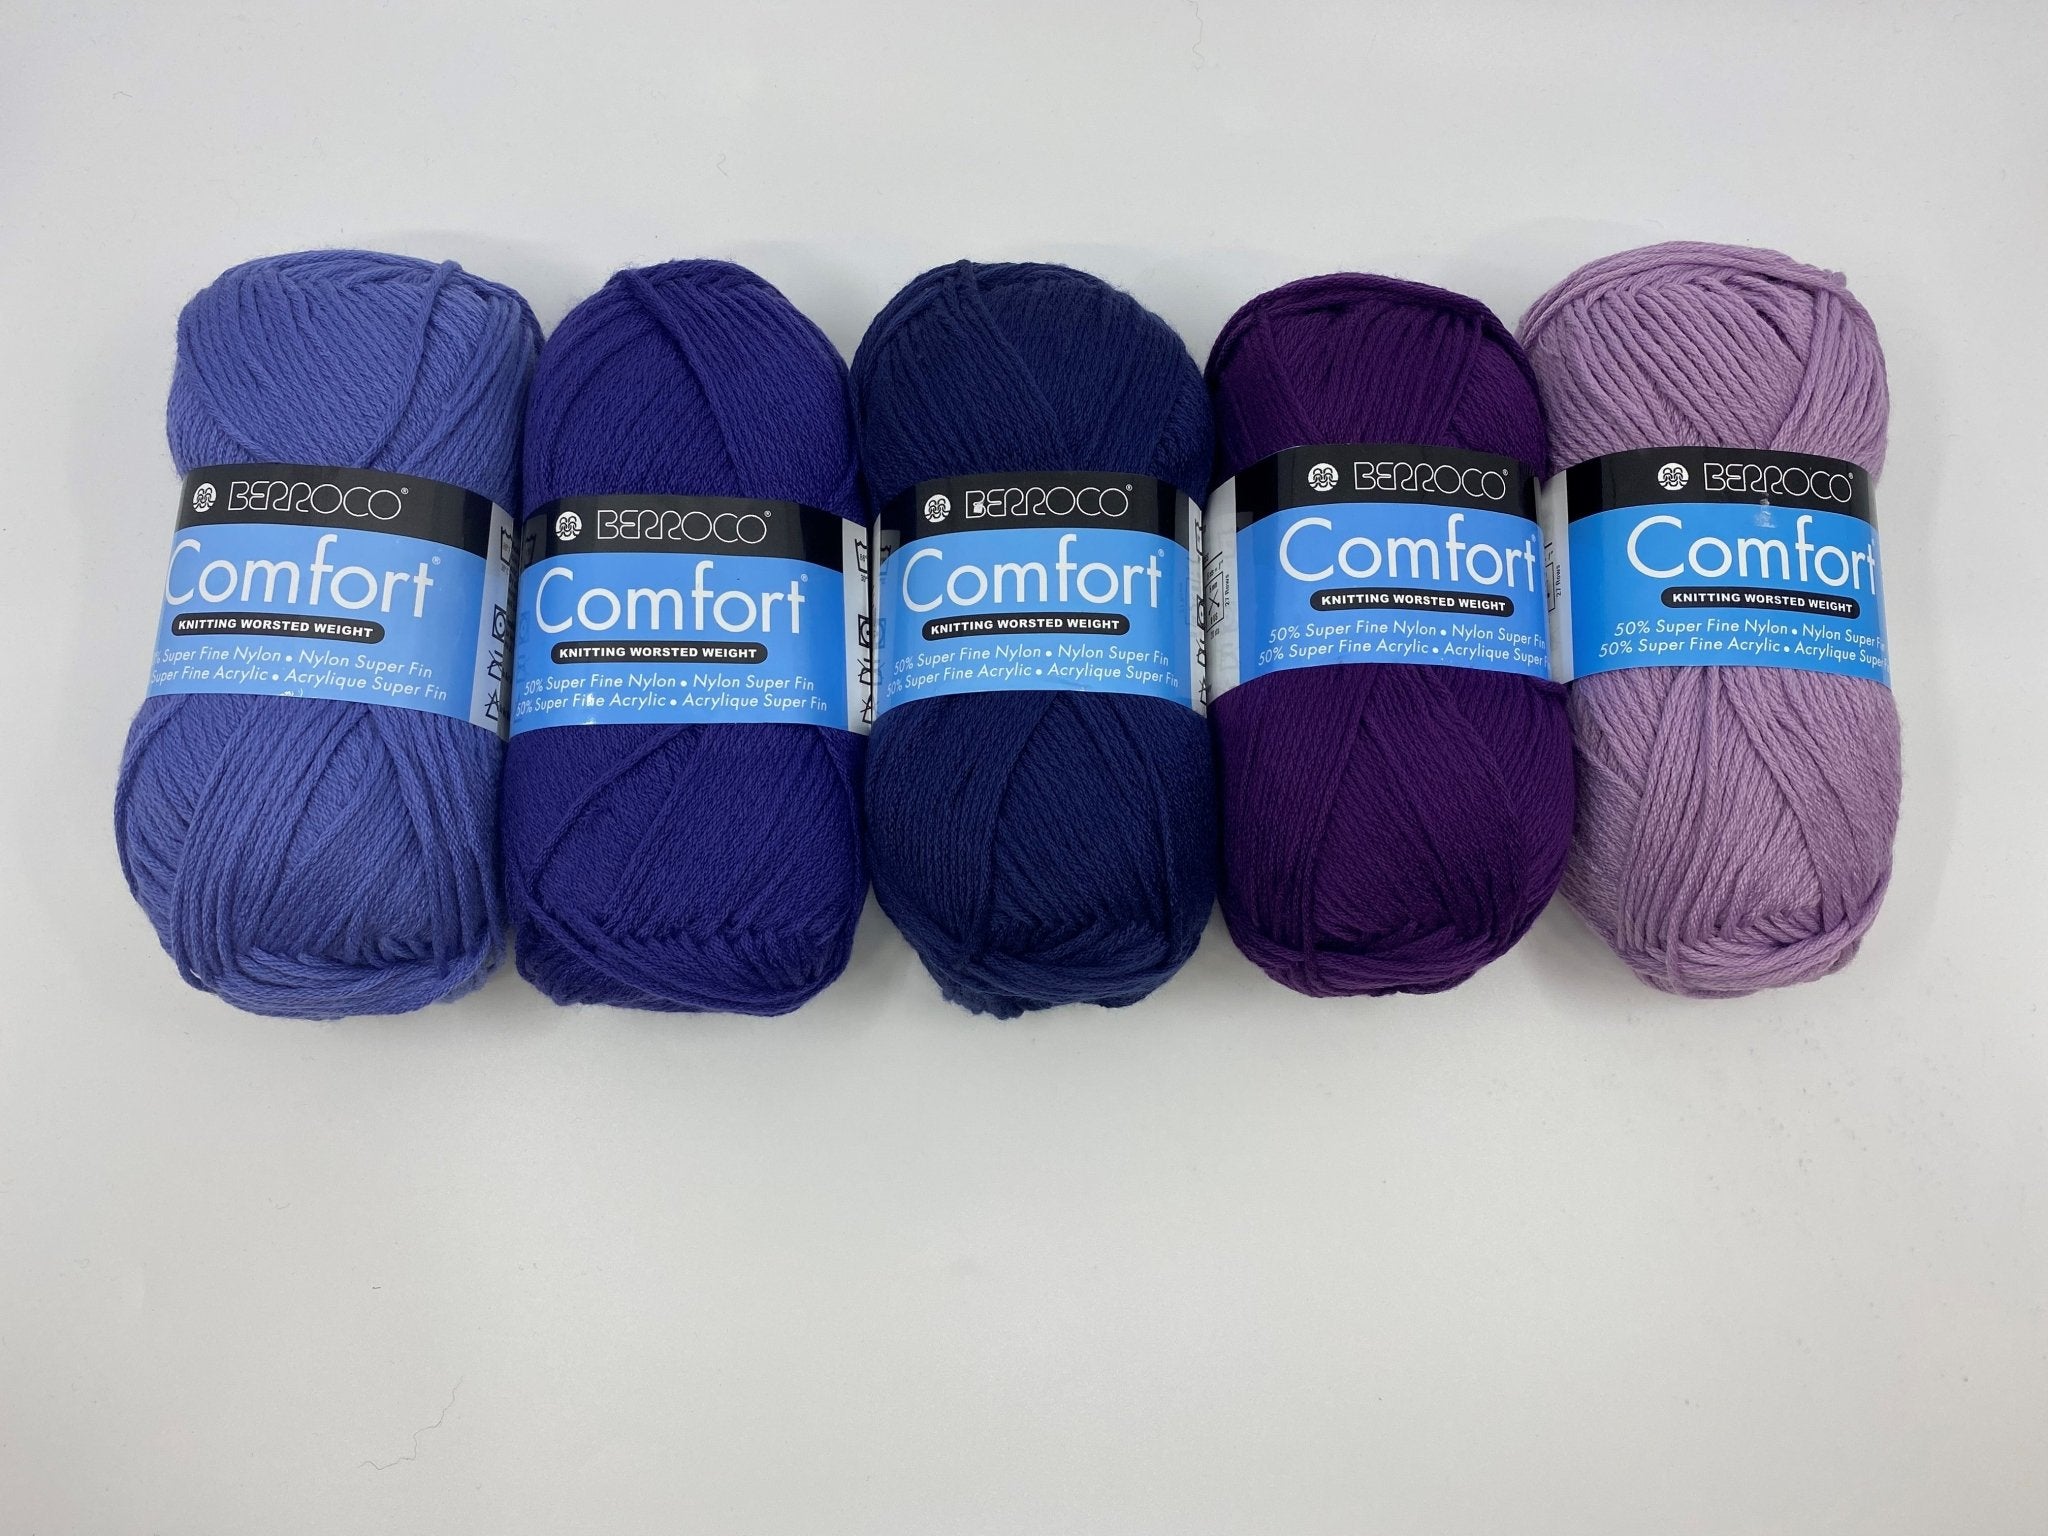 Comfort Knitting & Crochet: Afghans – Mother of Purl Yarn Shop